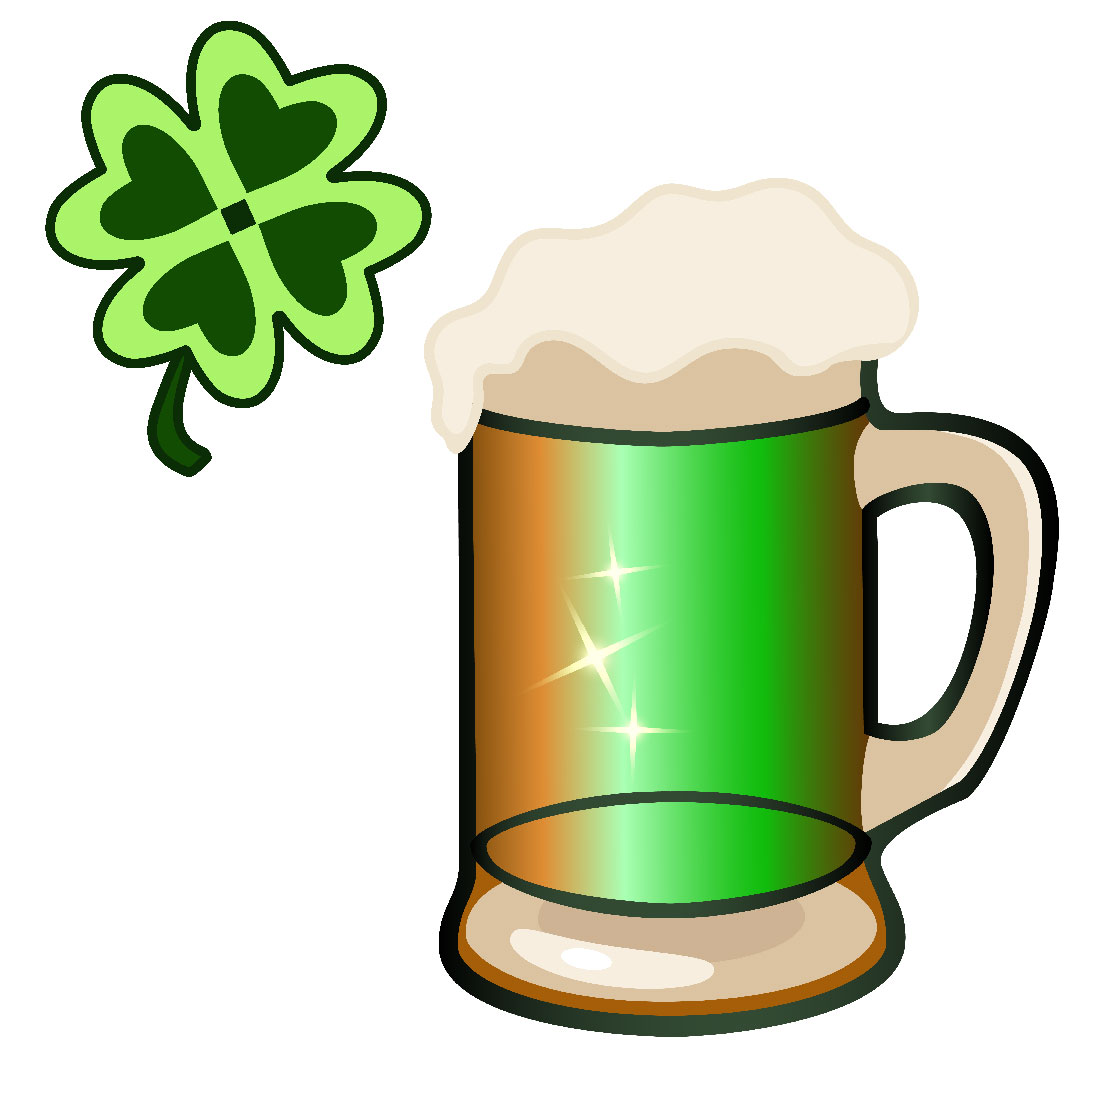 Mug of beer with a shamrock on the side.